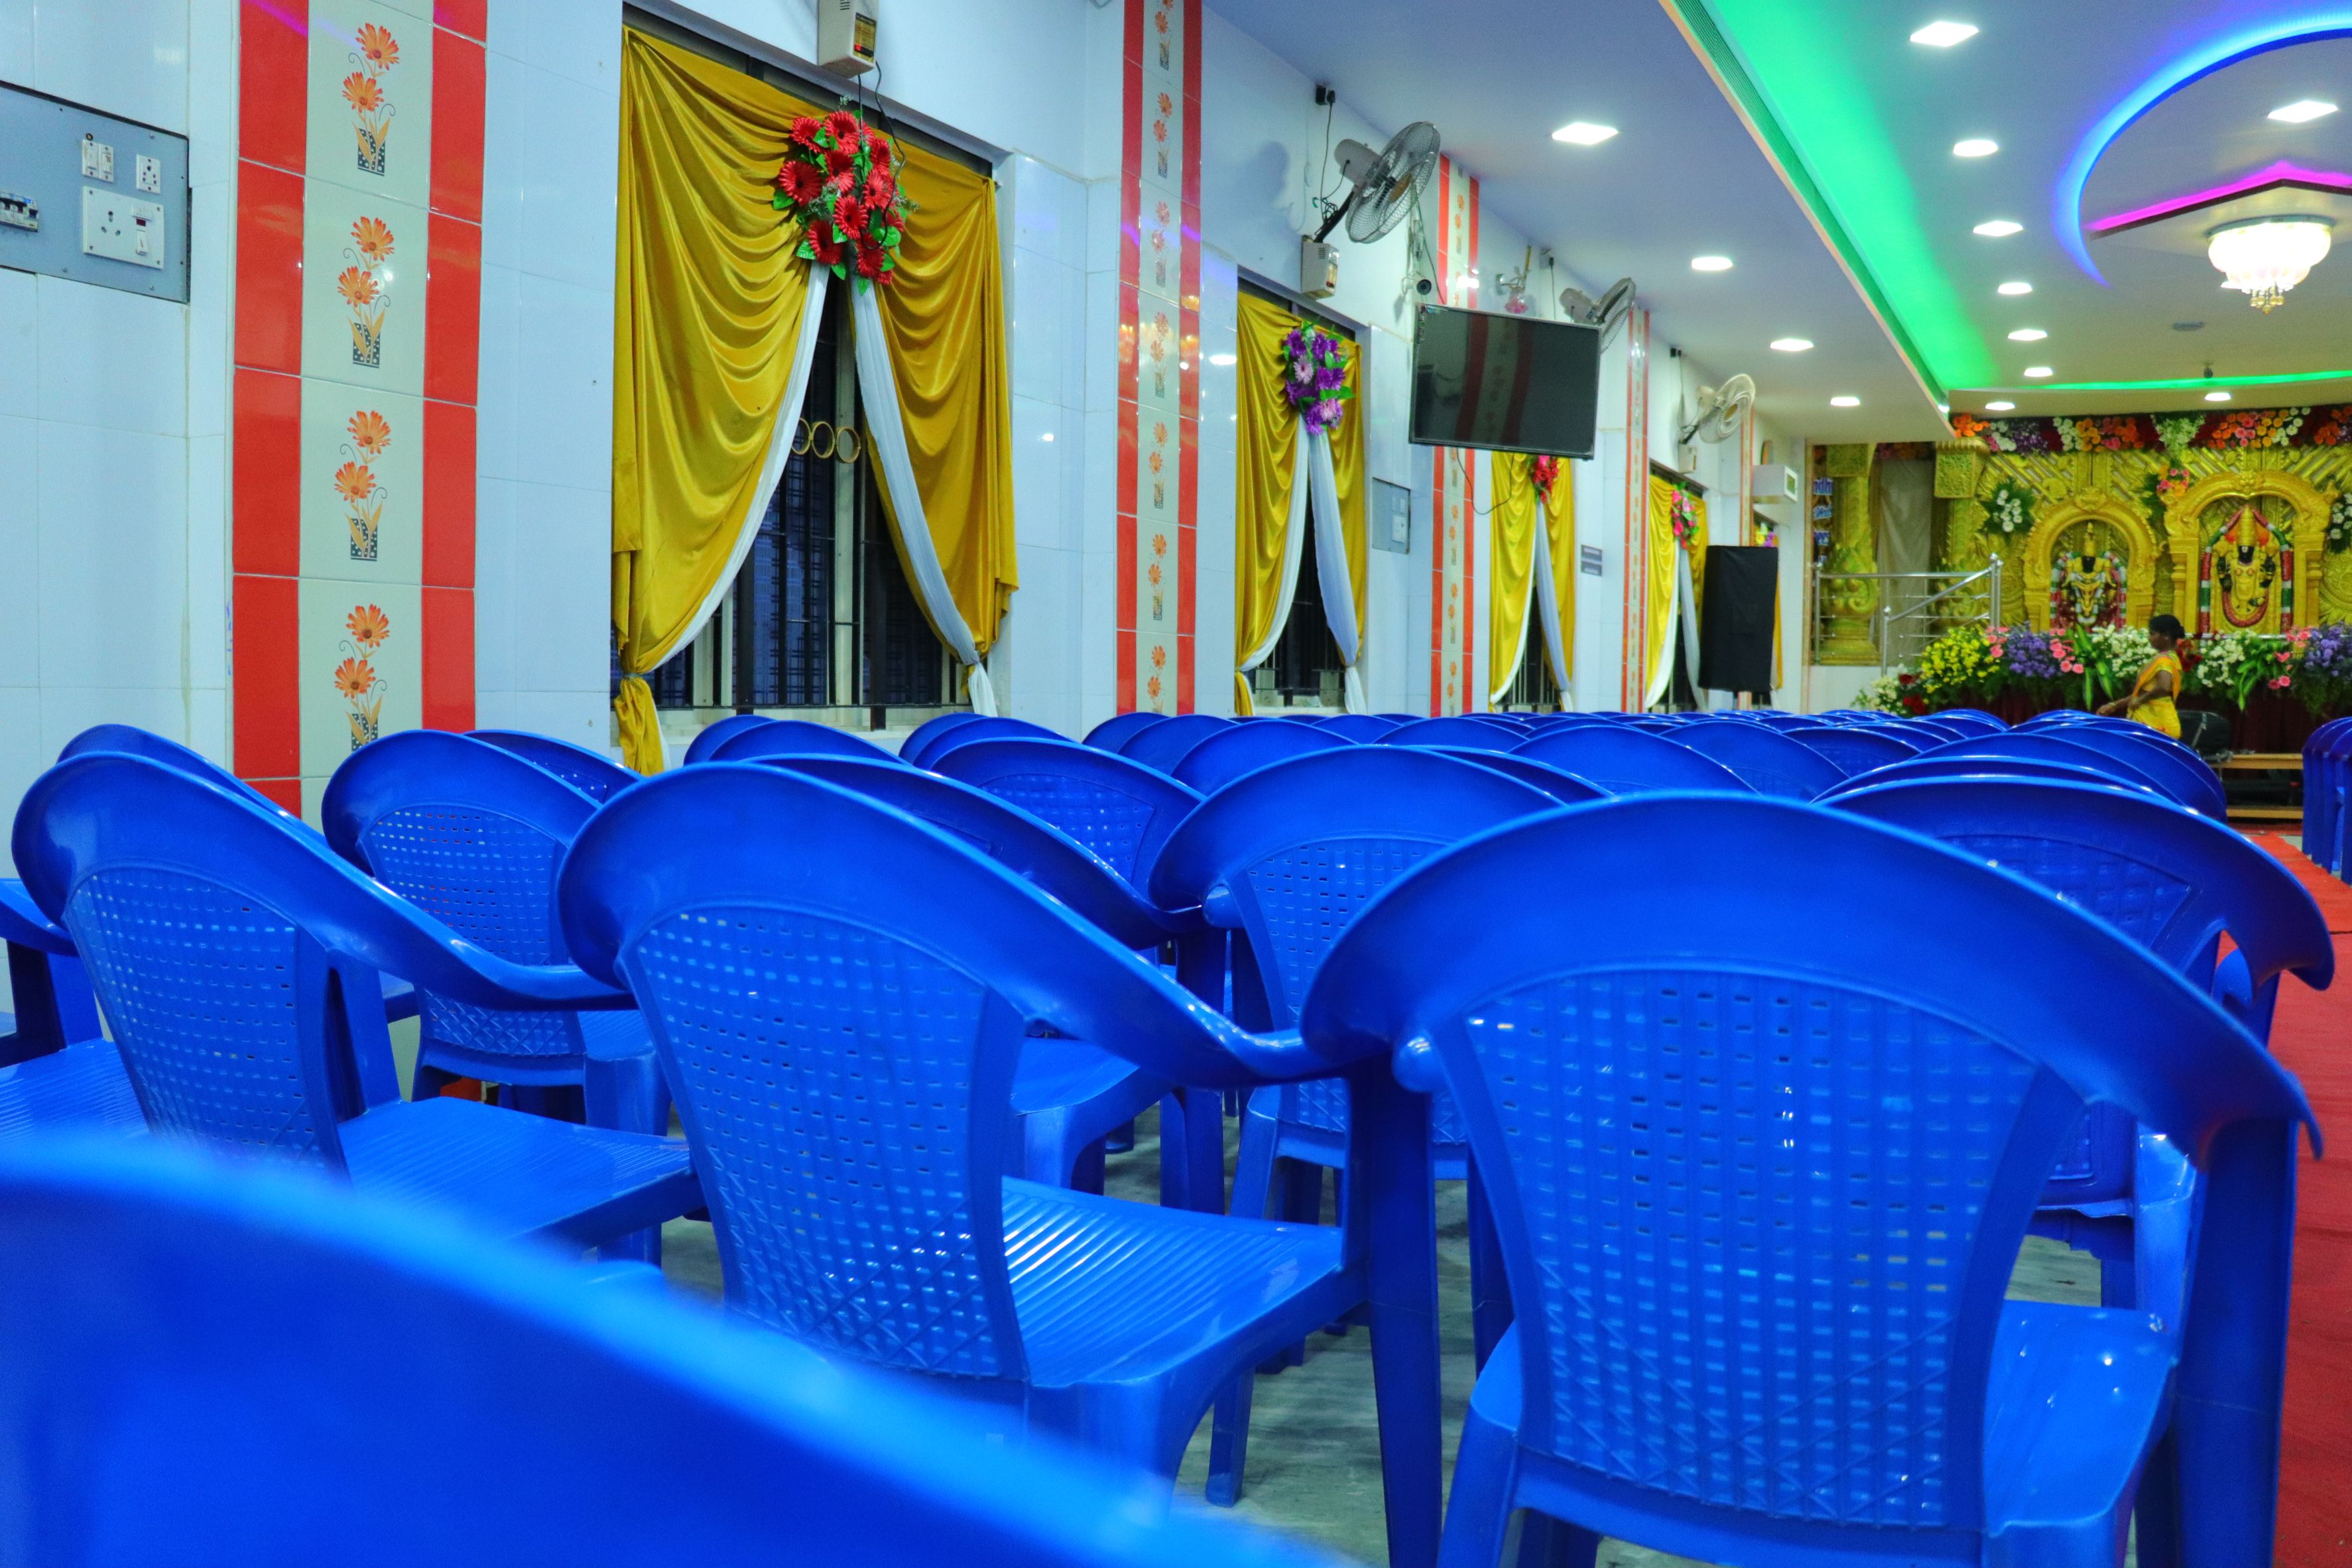 marriage hall in trichy